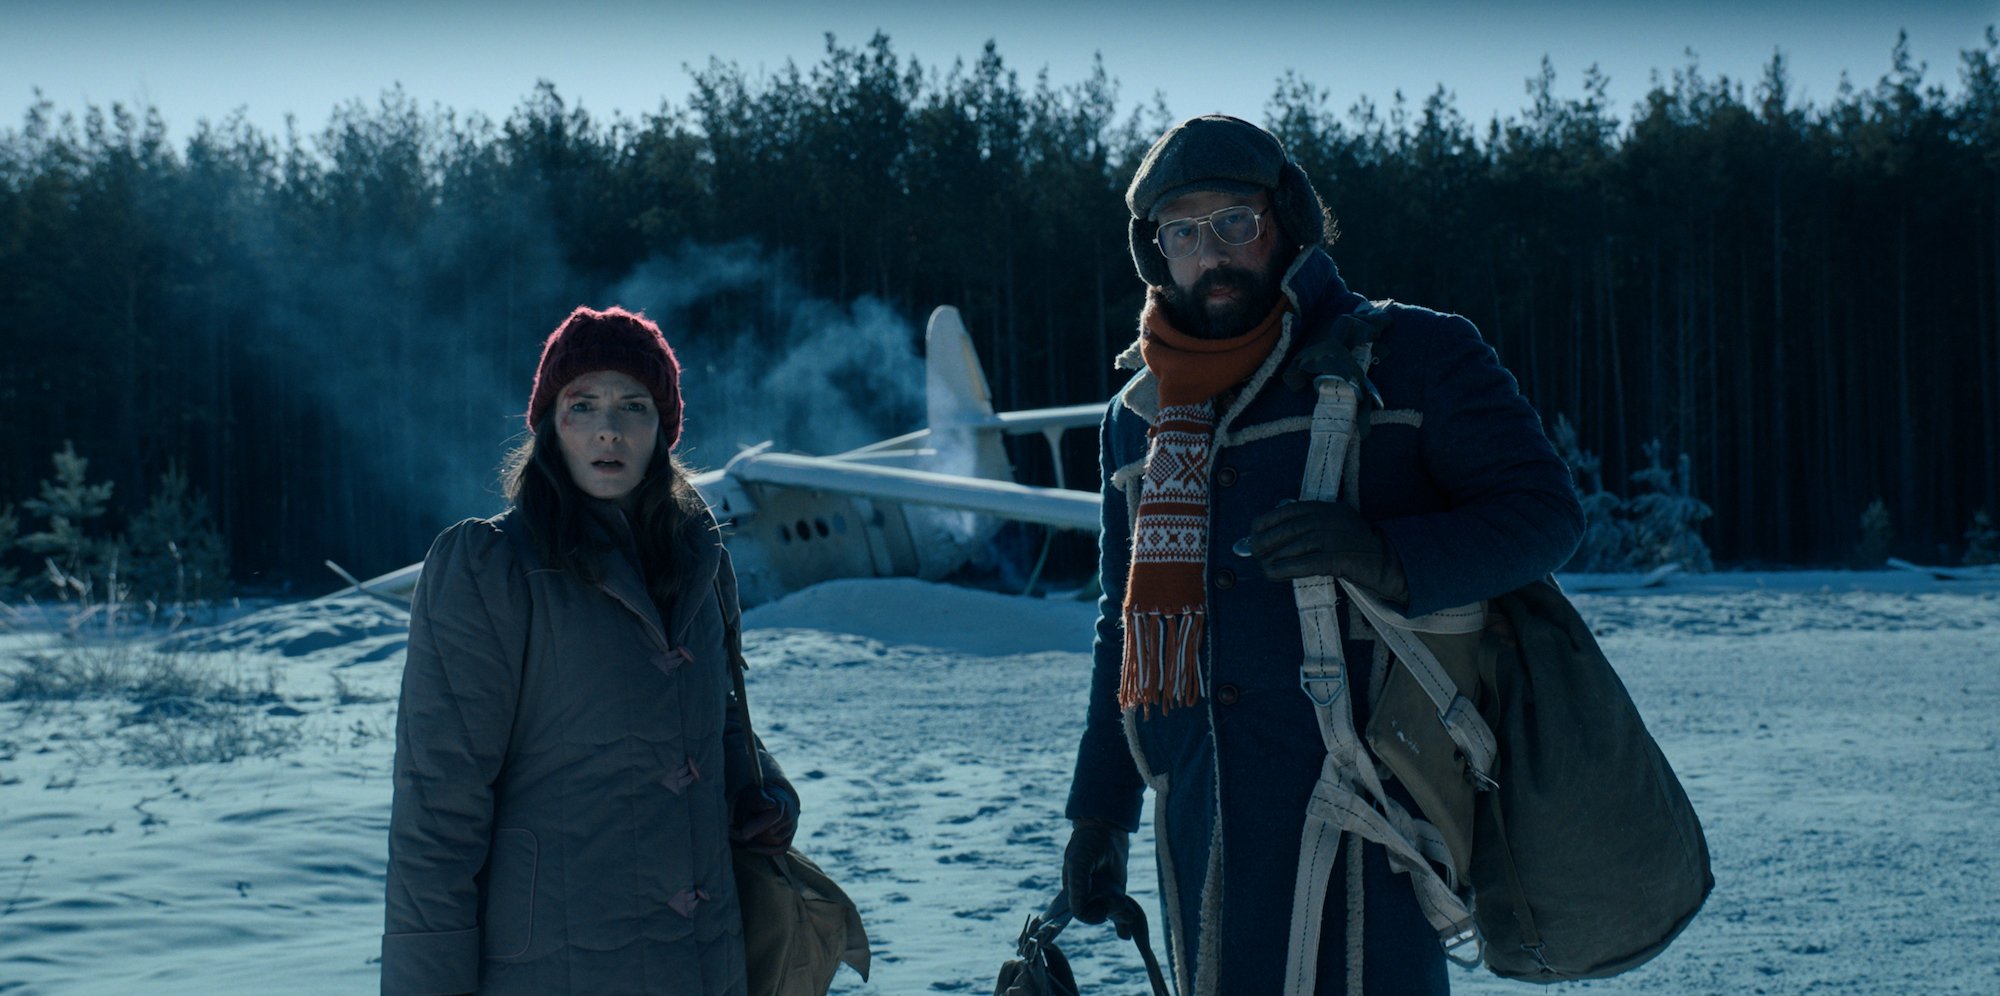 'Stranger Things 4' stars Brett Gelman and Winona Ryder in front of a crashed airplane on a snowy landscape in a production still from the series.